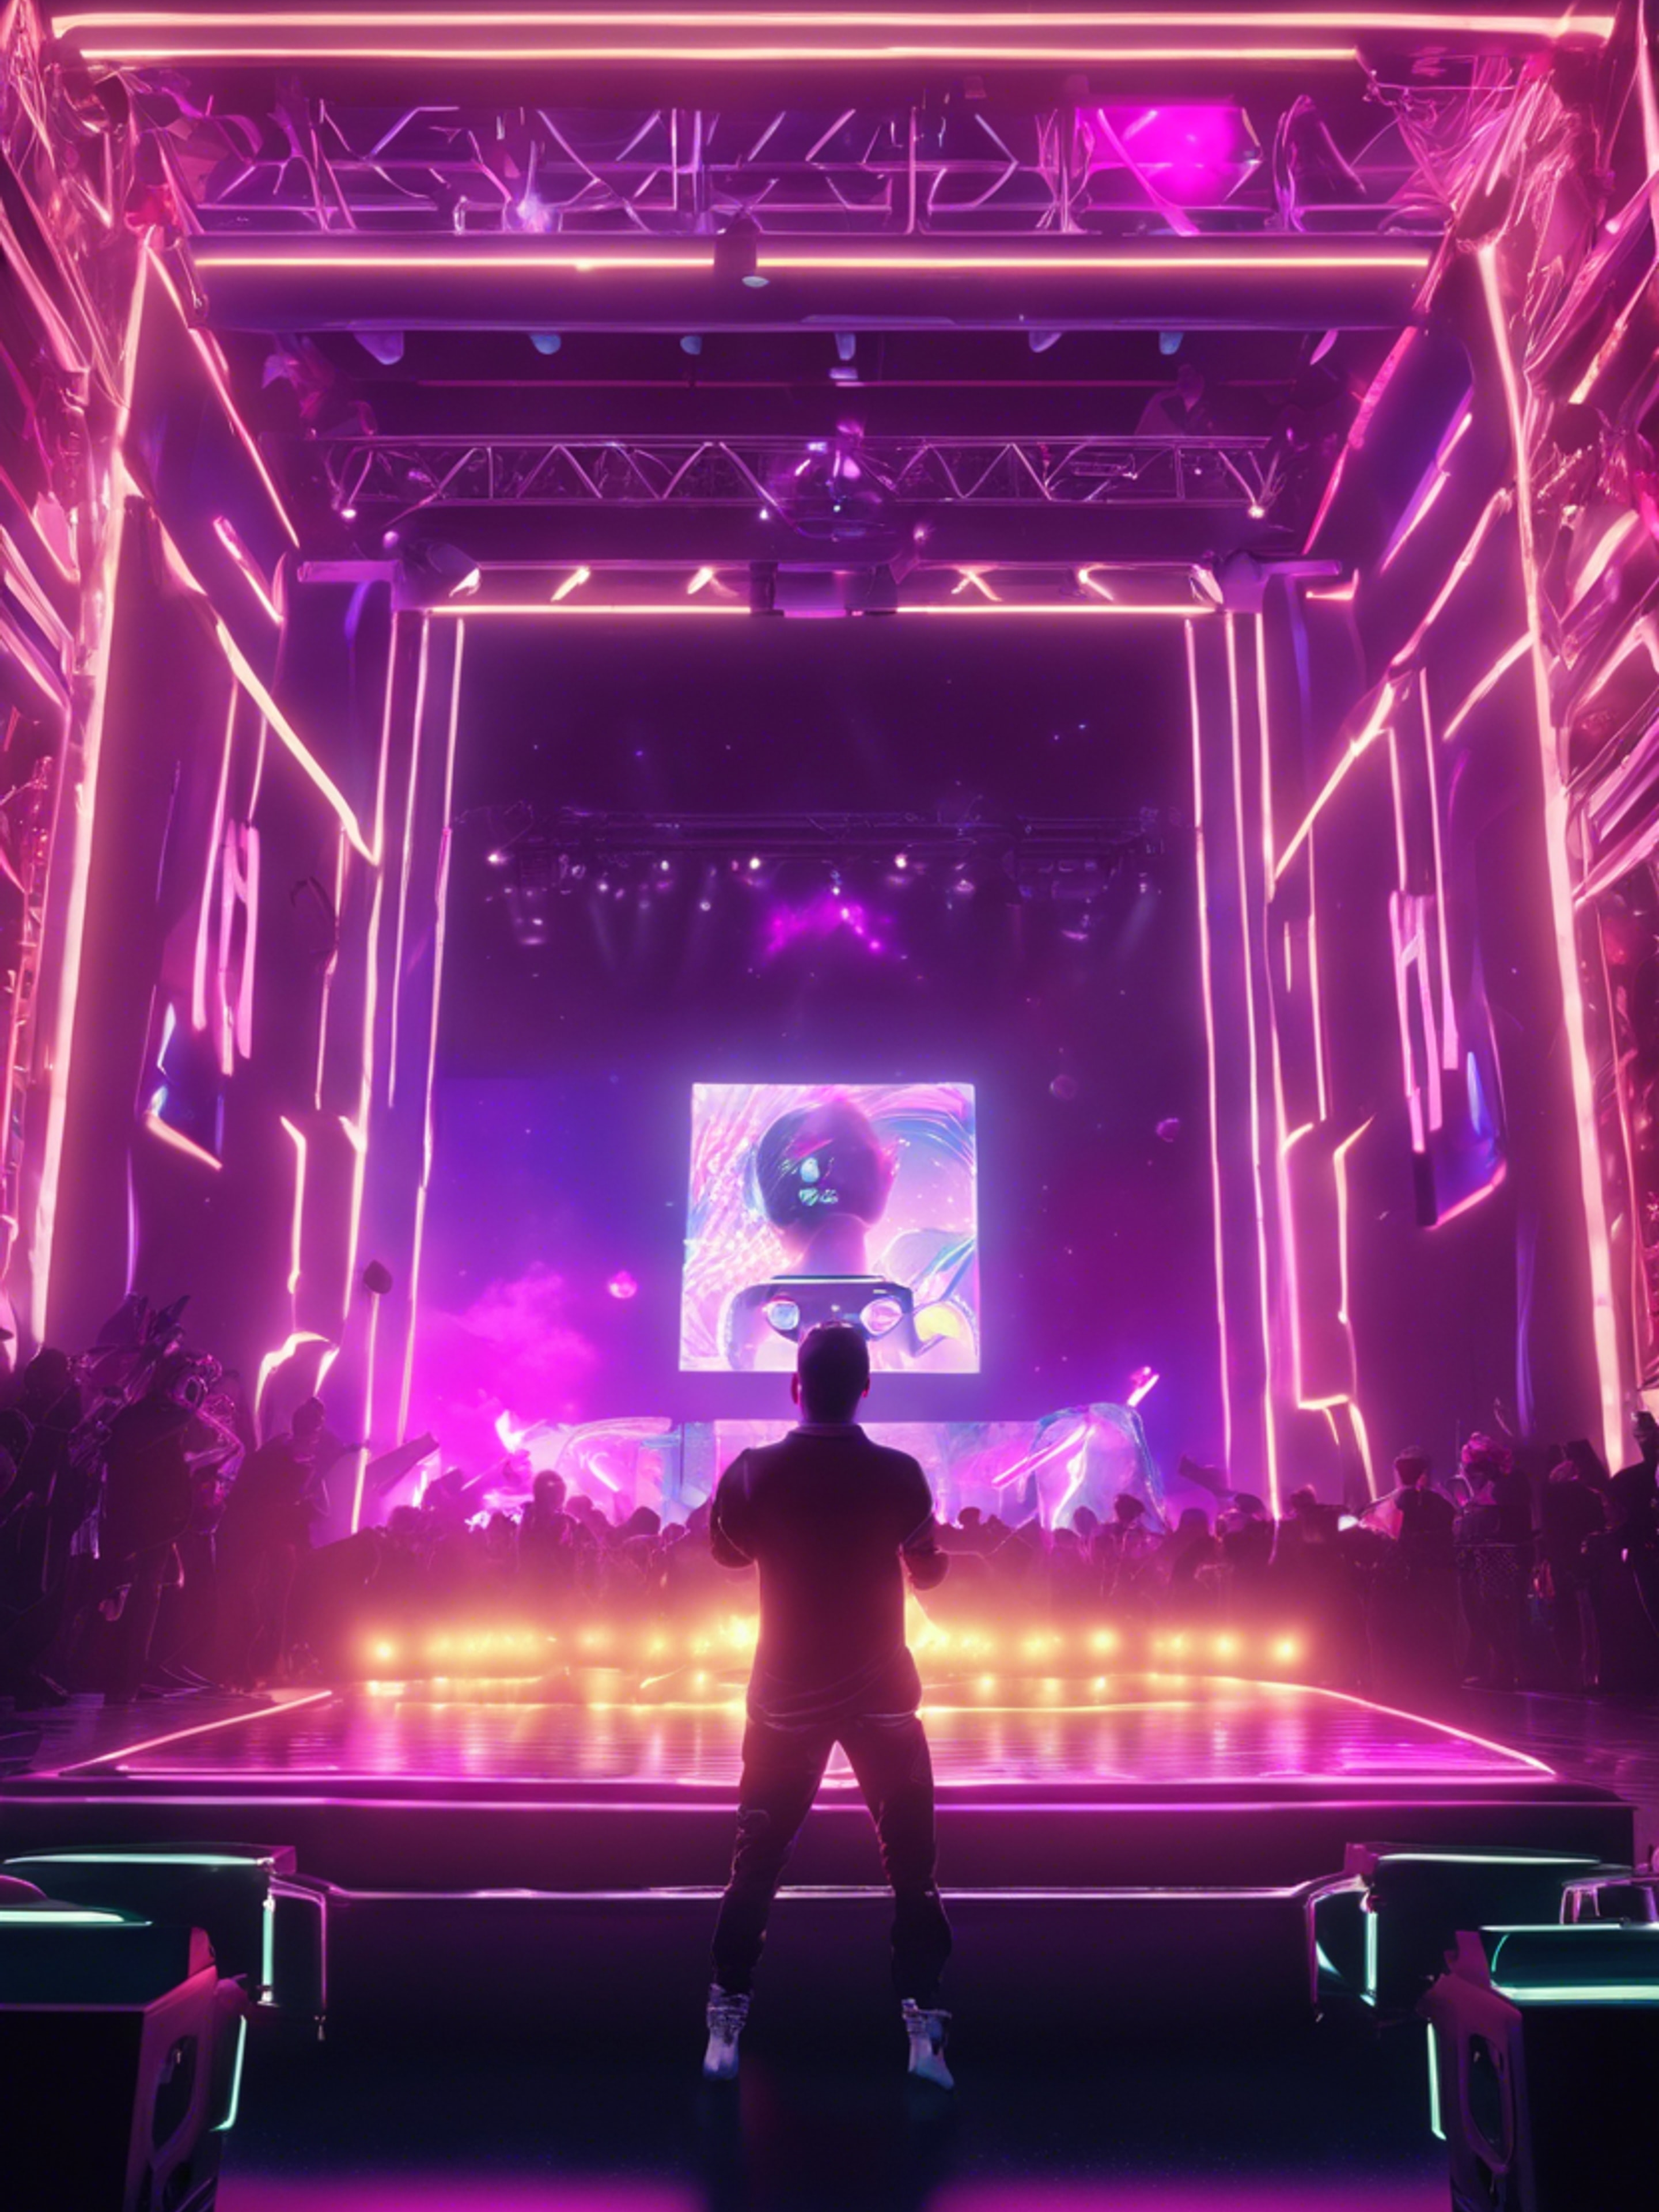 A virtual concert in a Y2K gaming environment, with neon spotlights showcasing a digital avatar performing onstage. Обои[570c0802add746f5a0b1]